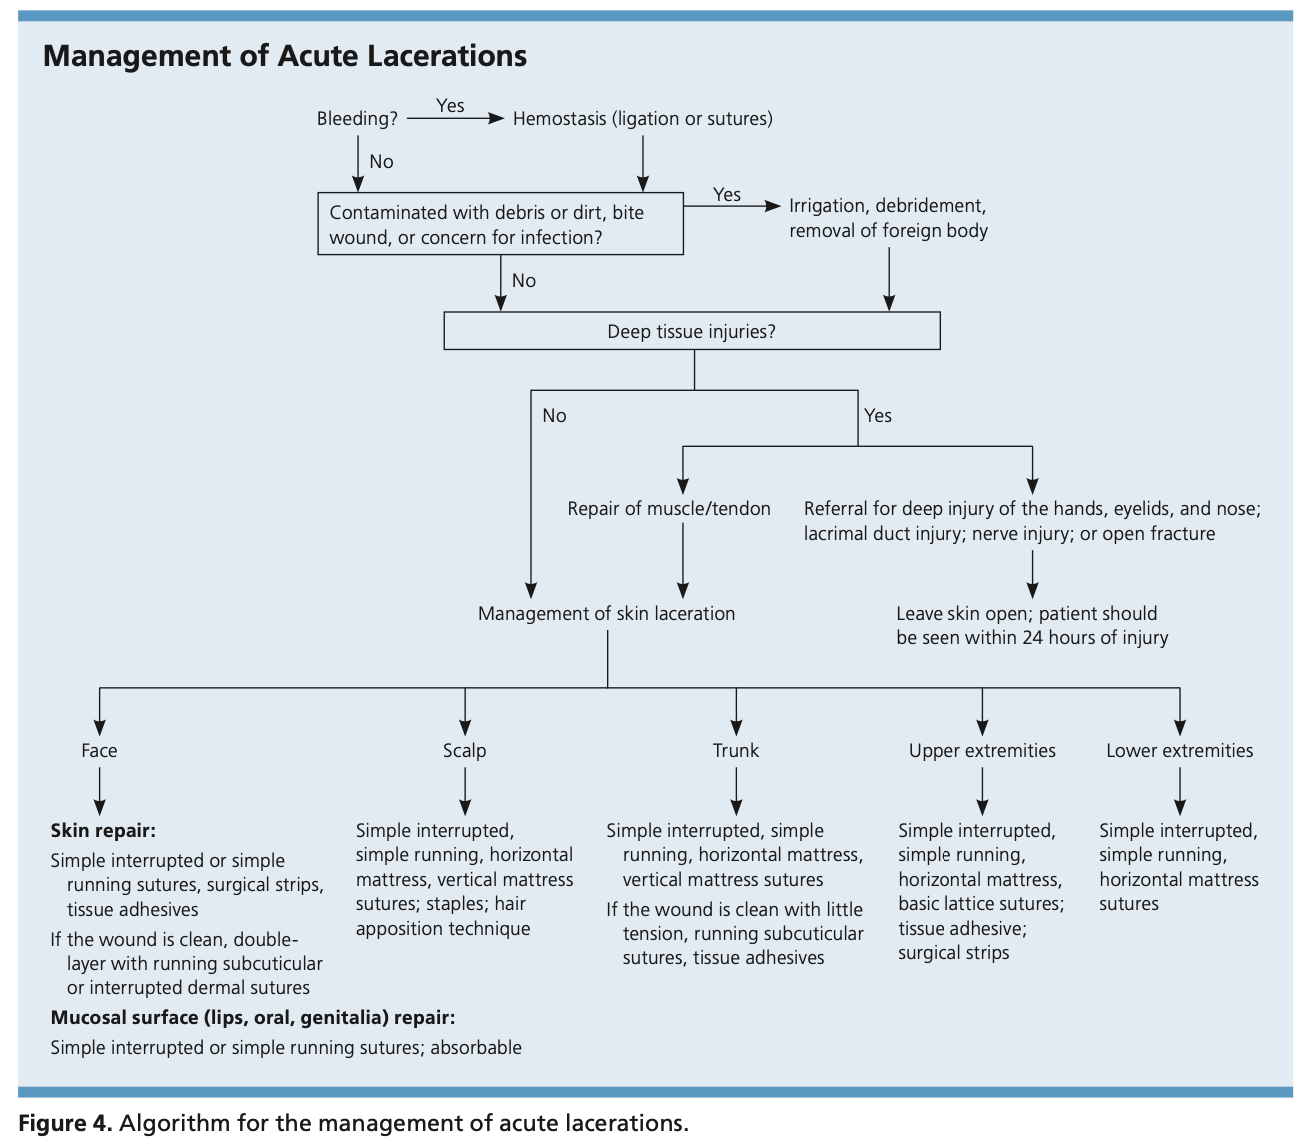 Management, Evaluation and Repair of Laceration